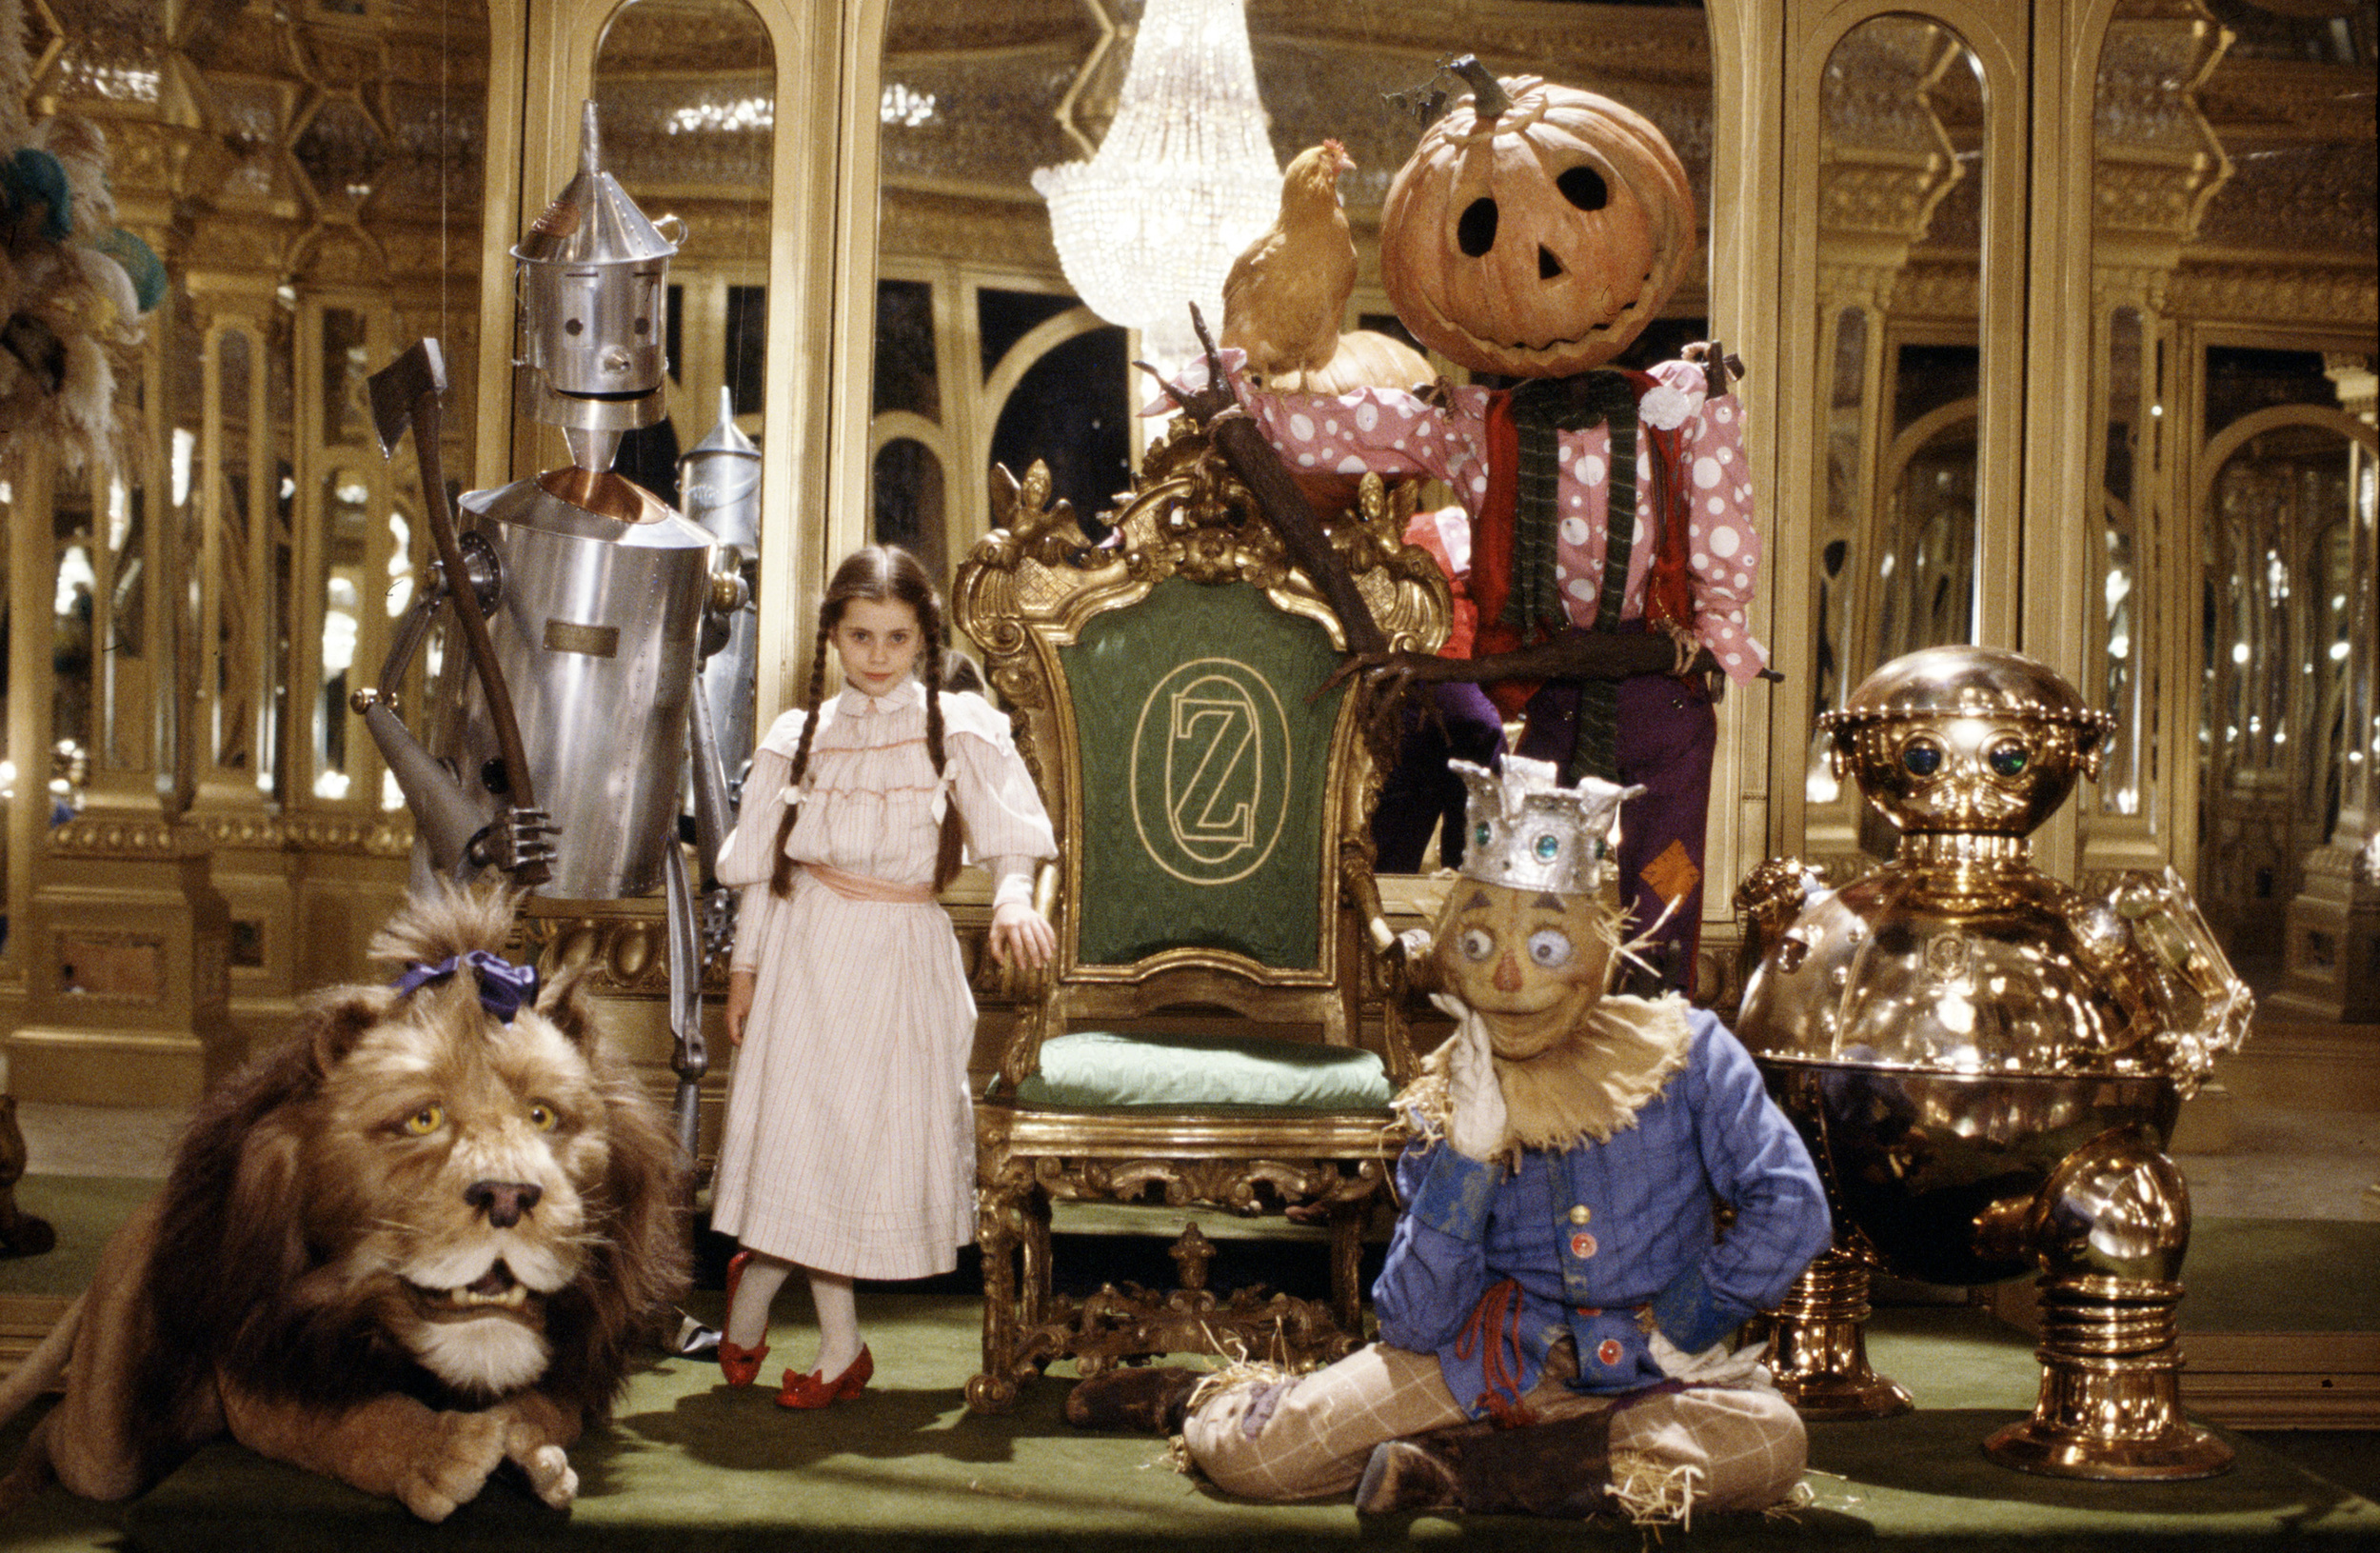 <p>Almost everyone is familiar with <span><em>The Wizard of Oz</em>, </span>one of the most beloved fantasy films ever made. Fewer might be familiar with <span><em>Return to Oz</em>, </span>which, unsurprisingly, focuses on Dorothy as she once again finds herself in the land of Oz. This version of the story is far darker and more sinister than its 1939 predecessor, but, oddly enough, in this respect, it is far truer to the spirit of the original novels by L. Frank Baum than was the case with the Judy Garland film. If nothing else, it deserves credit for being willing to go in an entirely different direction than almost any Oz story that came before it.</p><p><a href='https://www.msn.com/en-us/community/channel/vid-cj9pqbr0vn9in2b6ddcd8sfgpfq6x6utp44fssrv6mc2gtybw0us'>Follow us on MSN to see more of our exclusive entertainment content.</a></p>